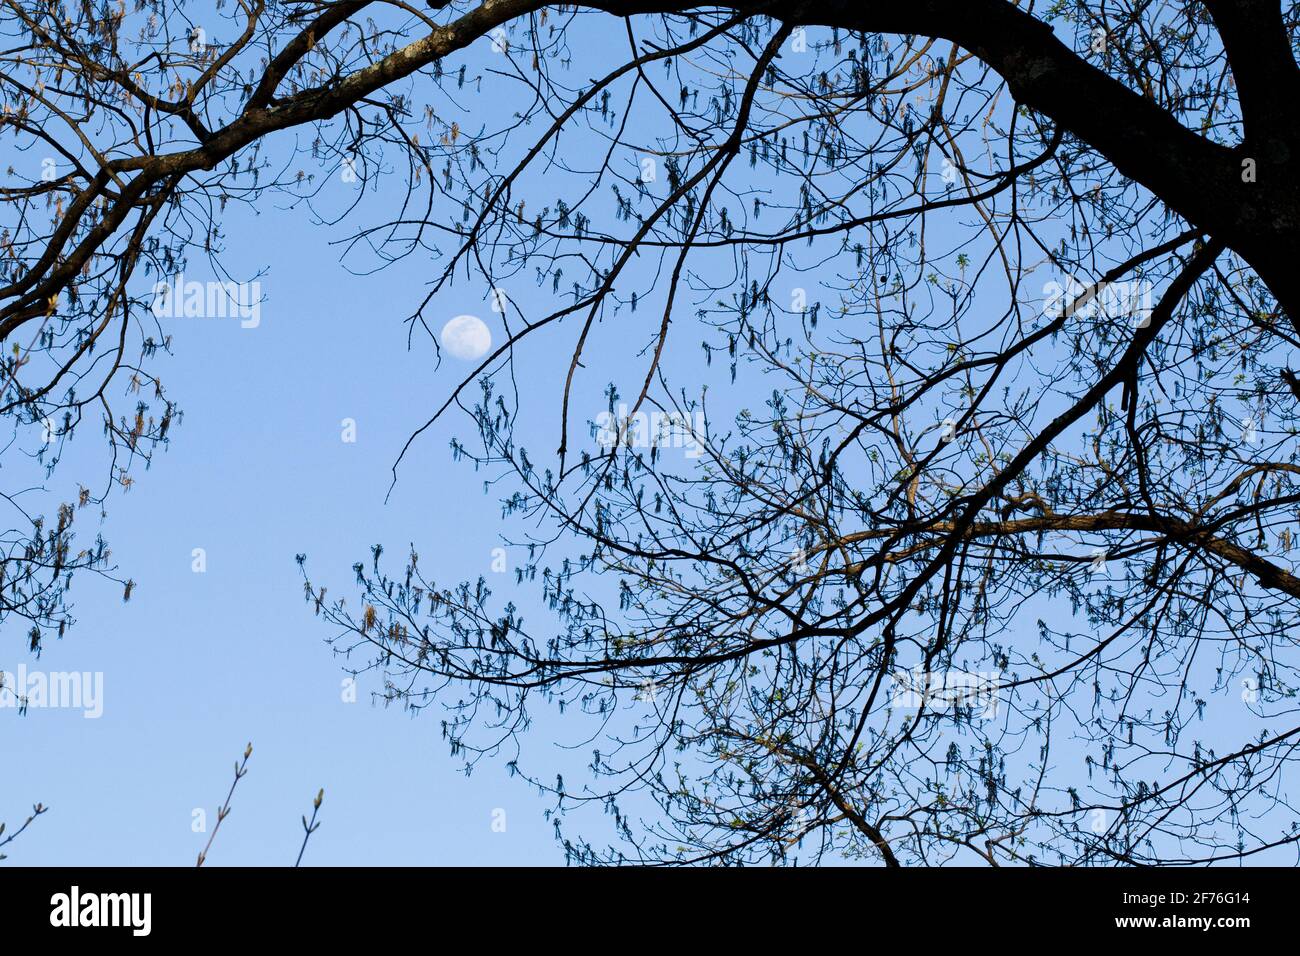 Moon seen through tree branches in early evening sky - USA Stock Photo